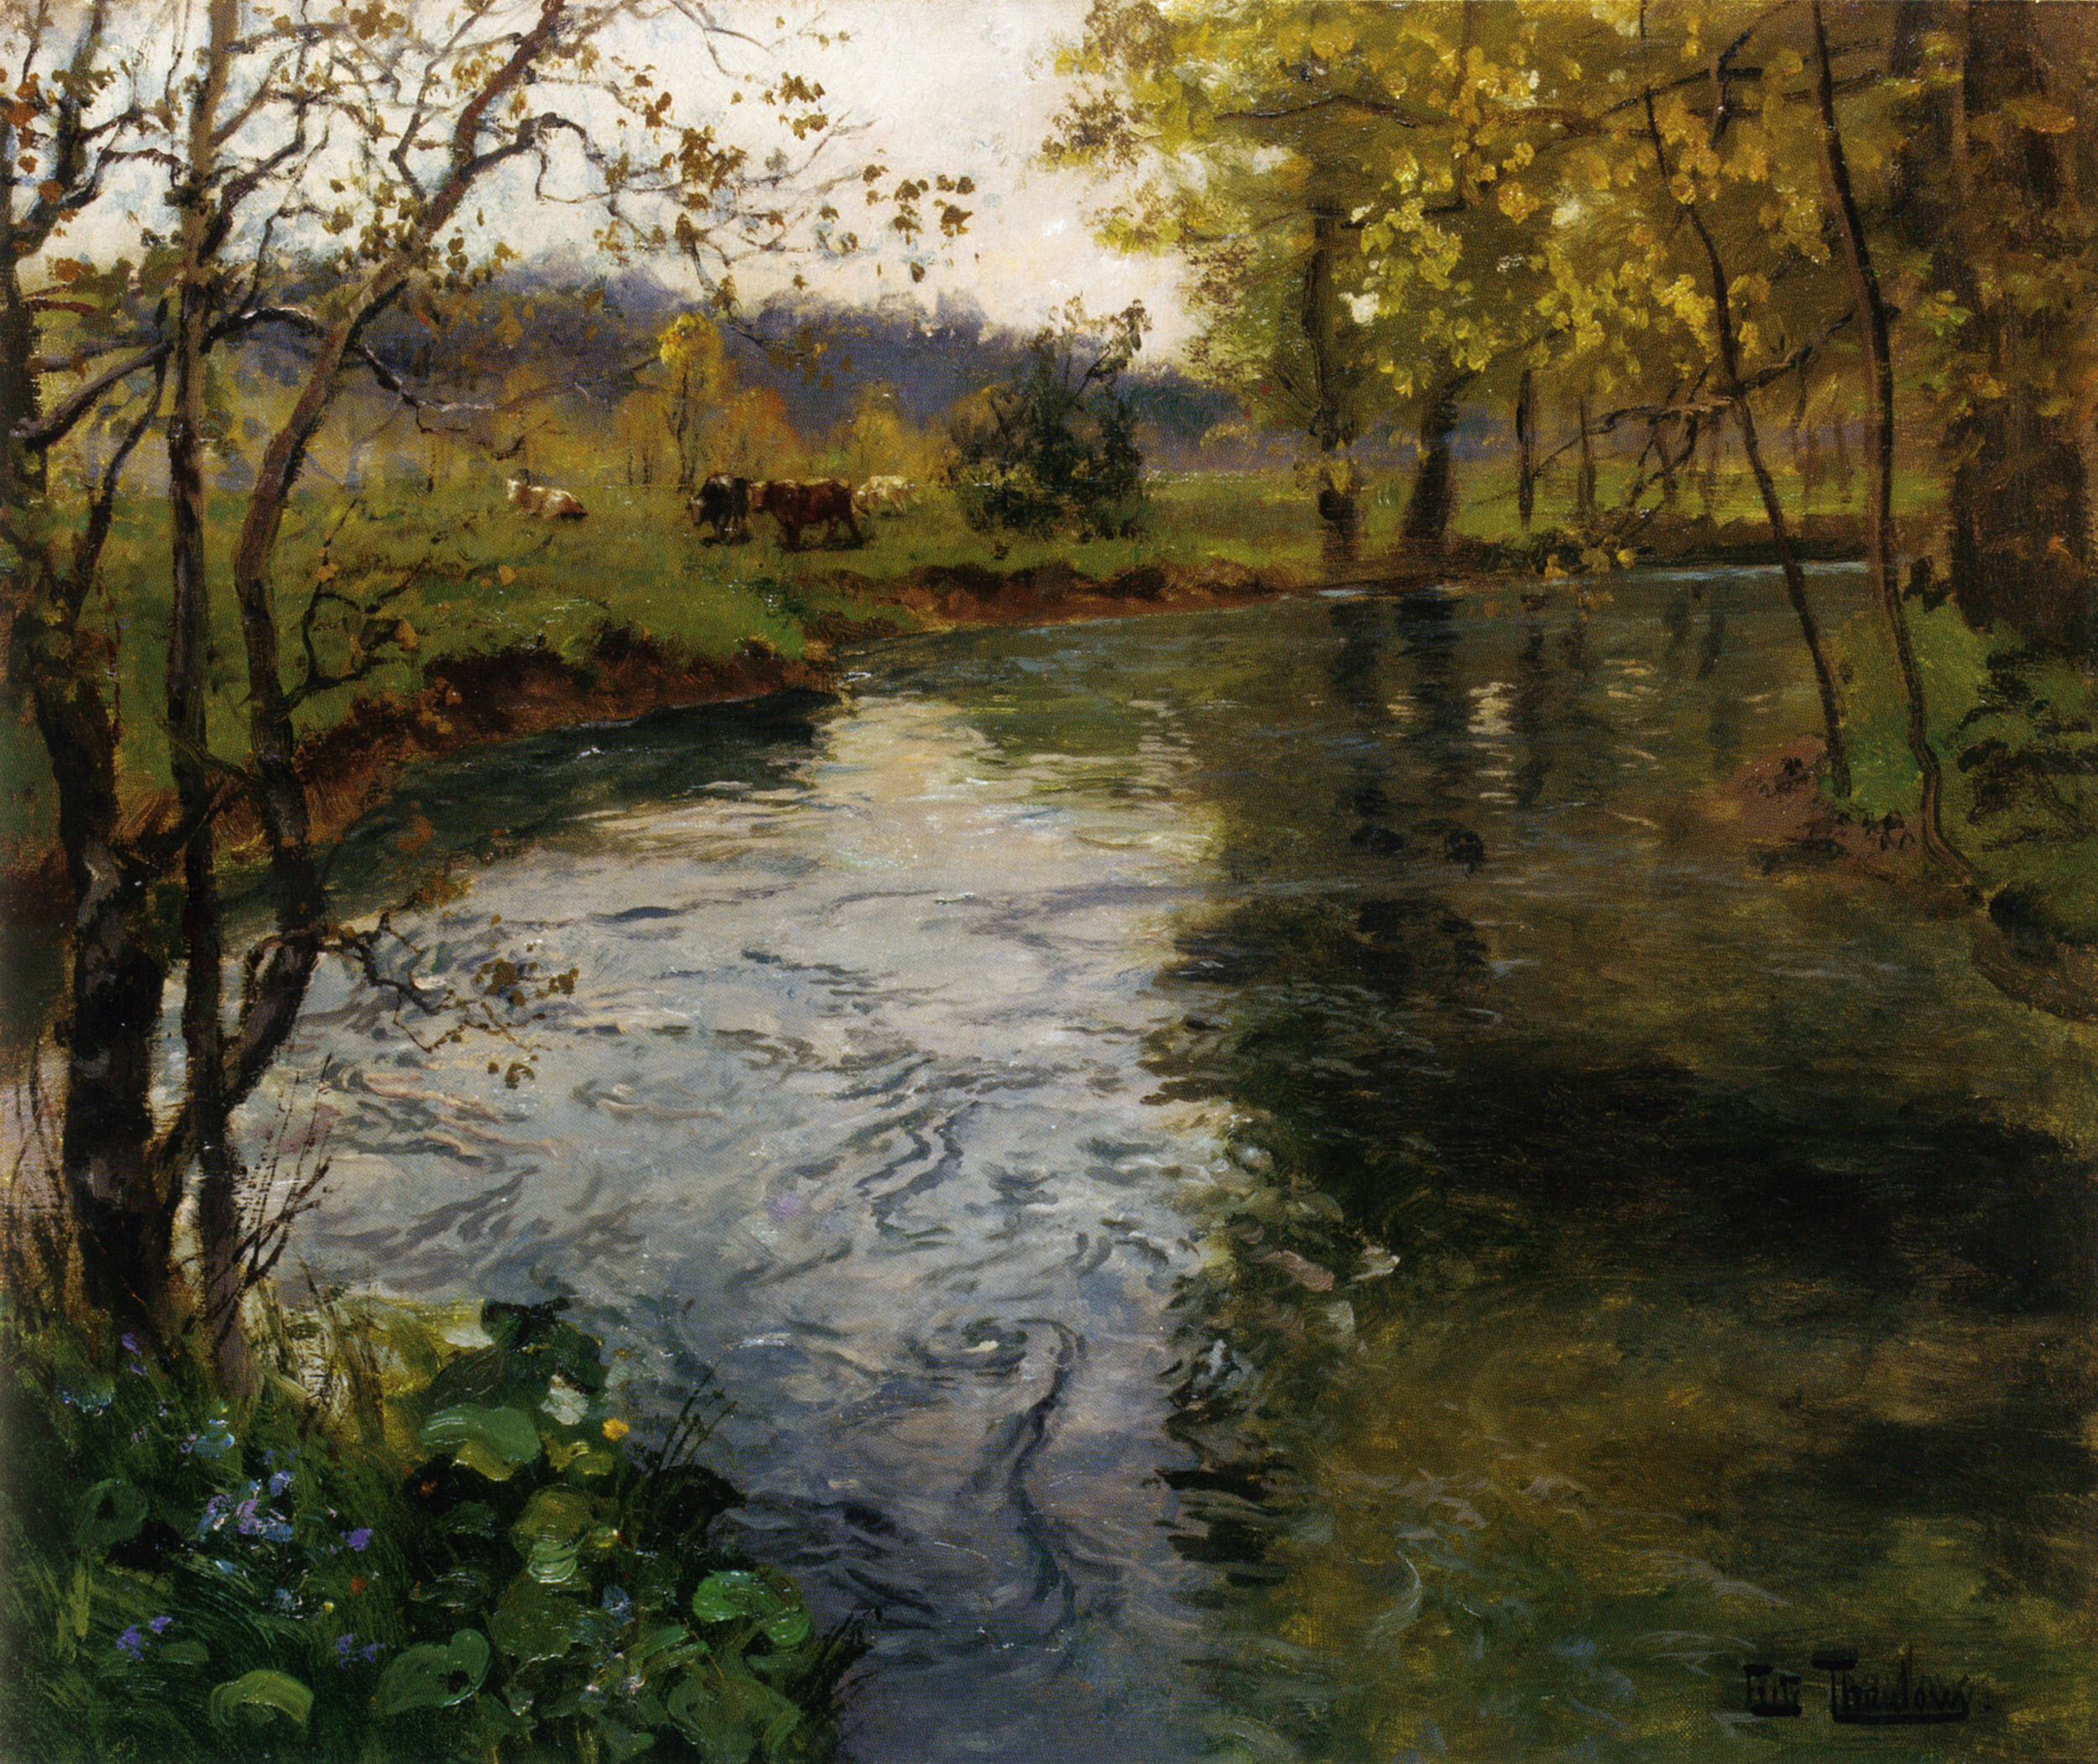 Landscape with Cows by a Stream by Fritz Thaulow